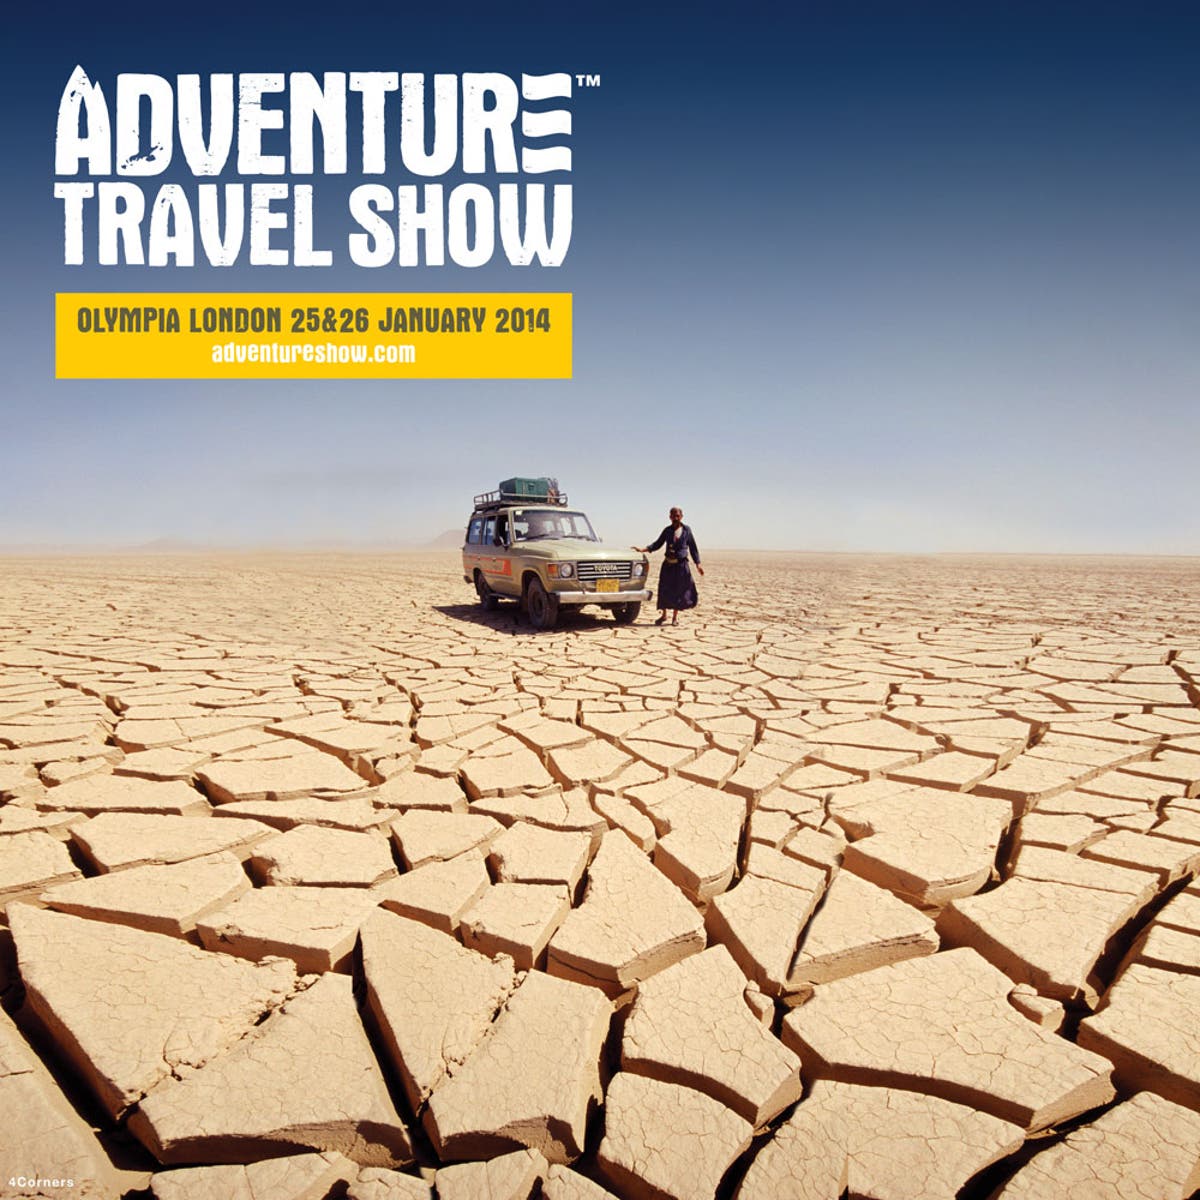 The Adventure Travel Show 2014: half price tickets | The Independent ...